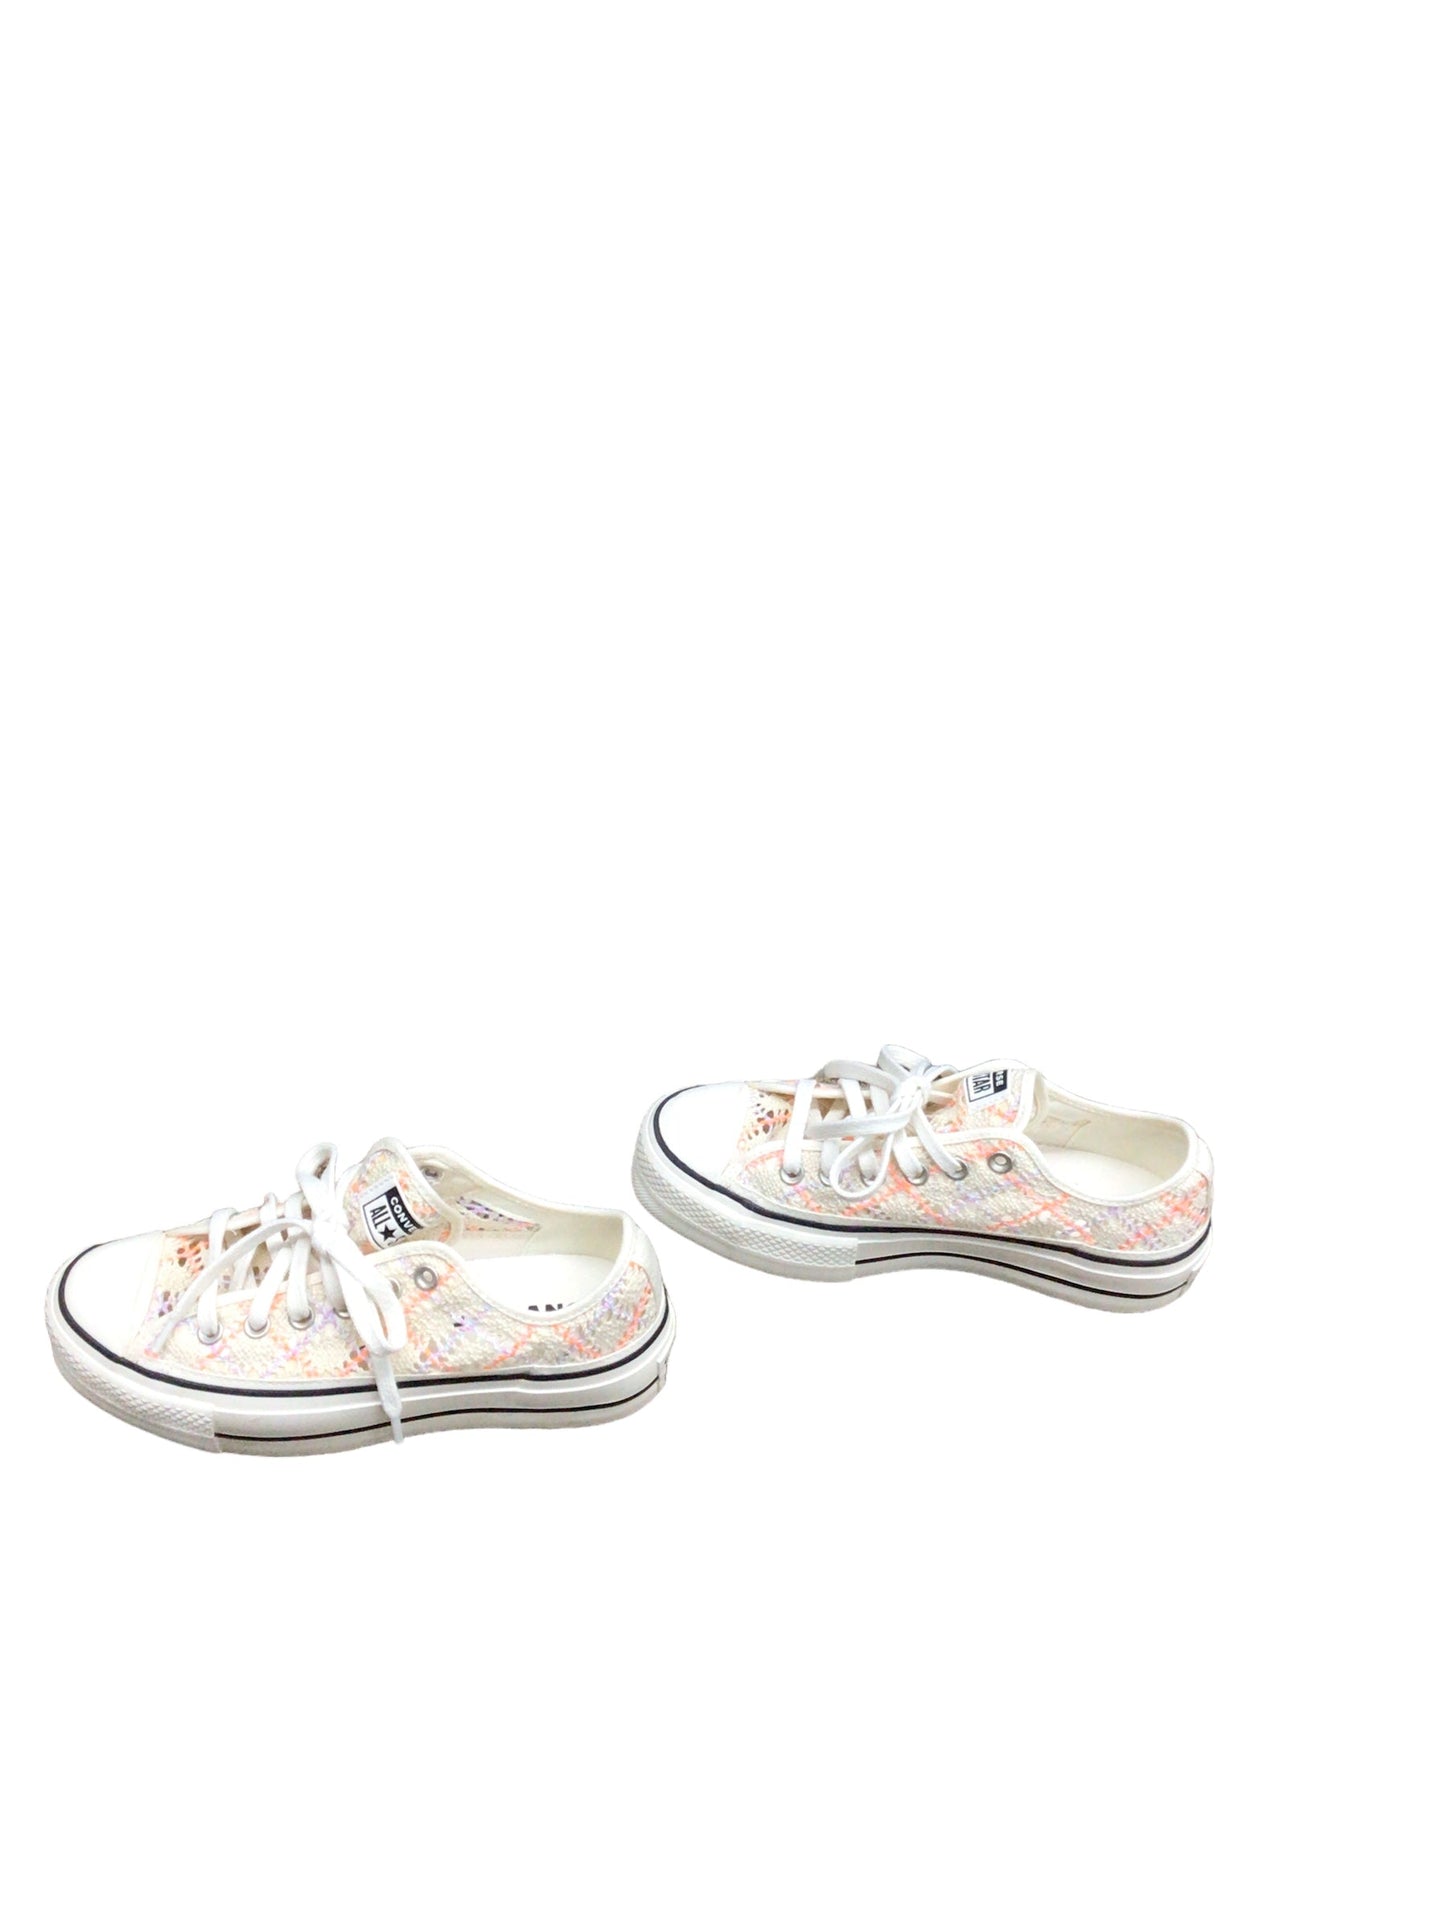 Shoes Sneakers Platform By Converse  Size: 7.5